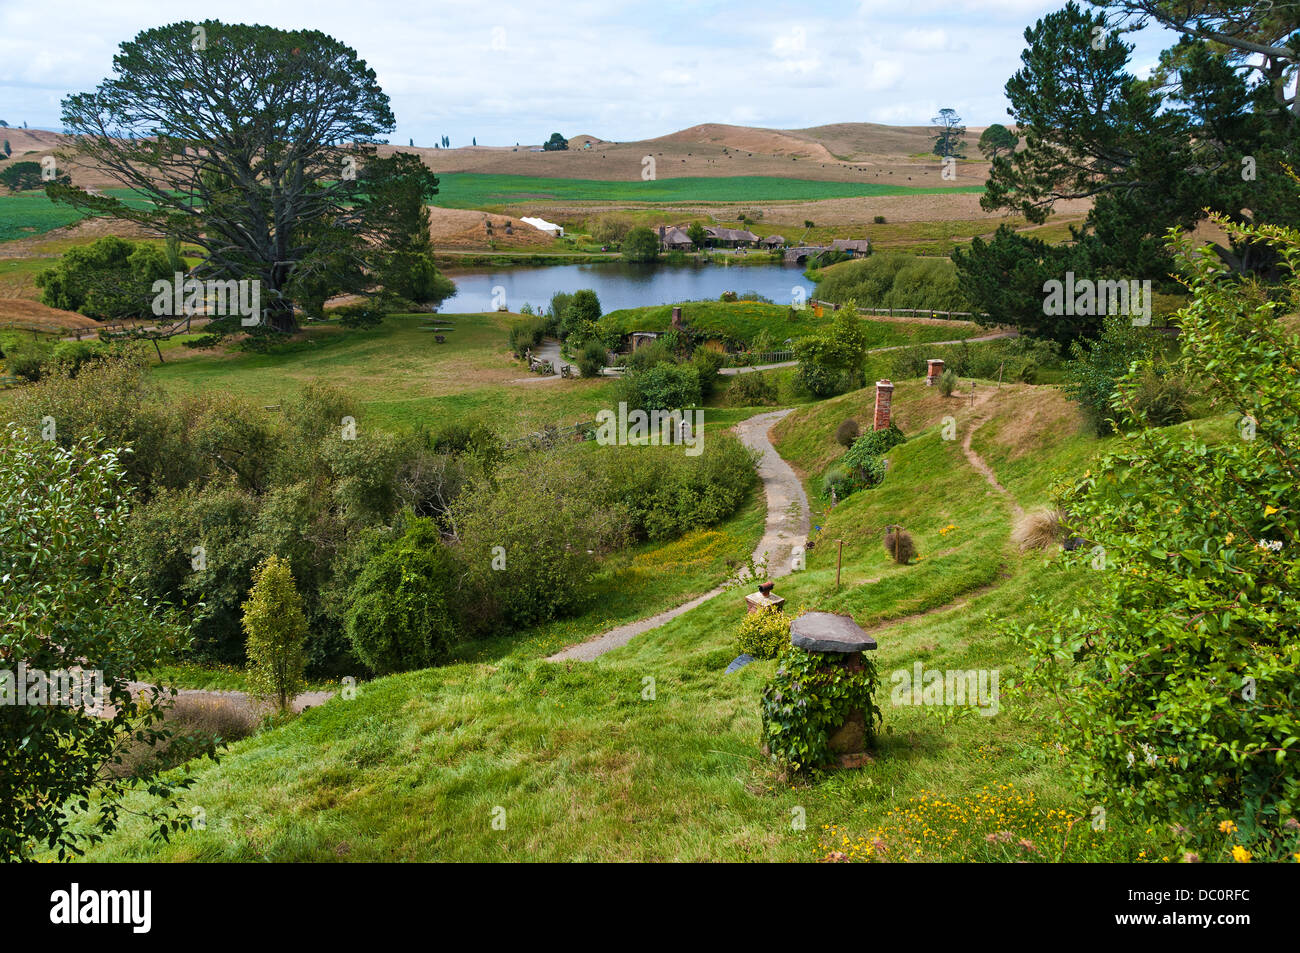 Very green Hobbiton with meandering path through image with lake and Party tree in background, showing hobbit hole chimneys Stock Photo